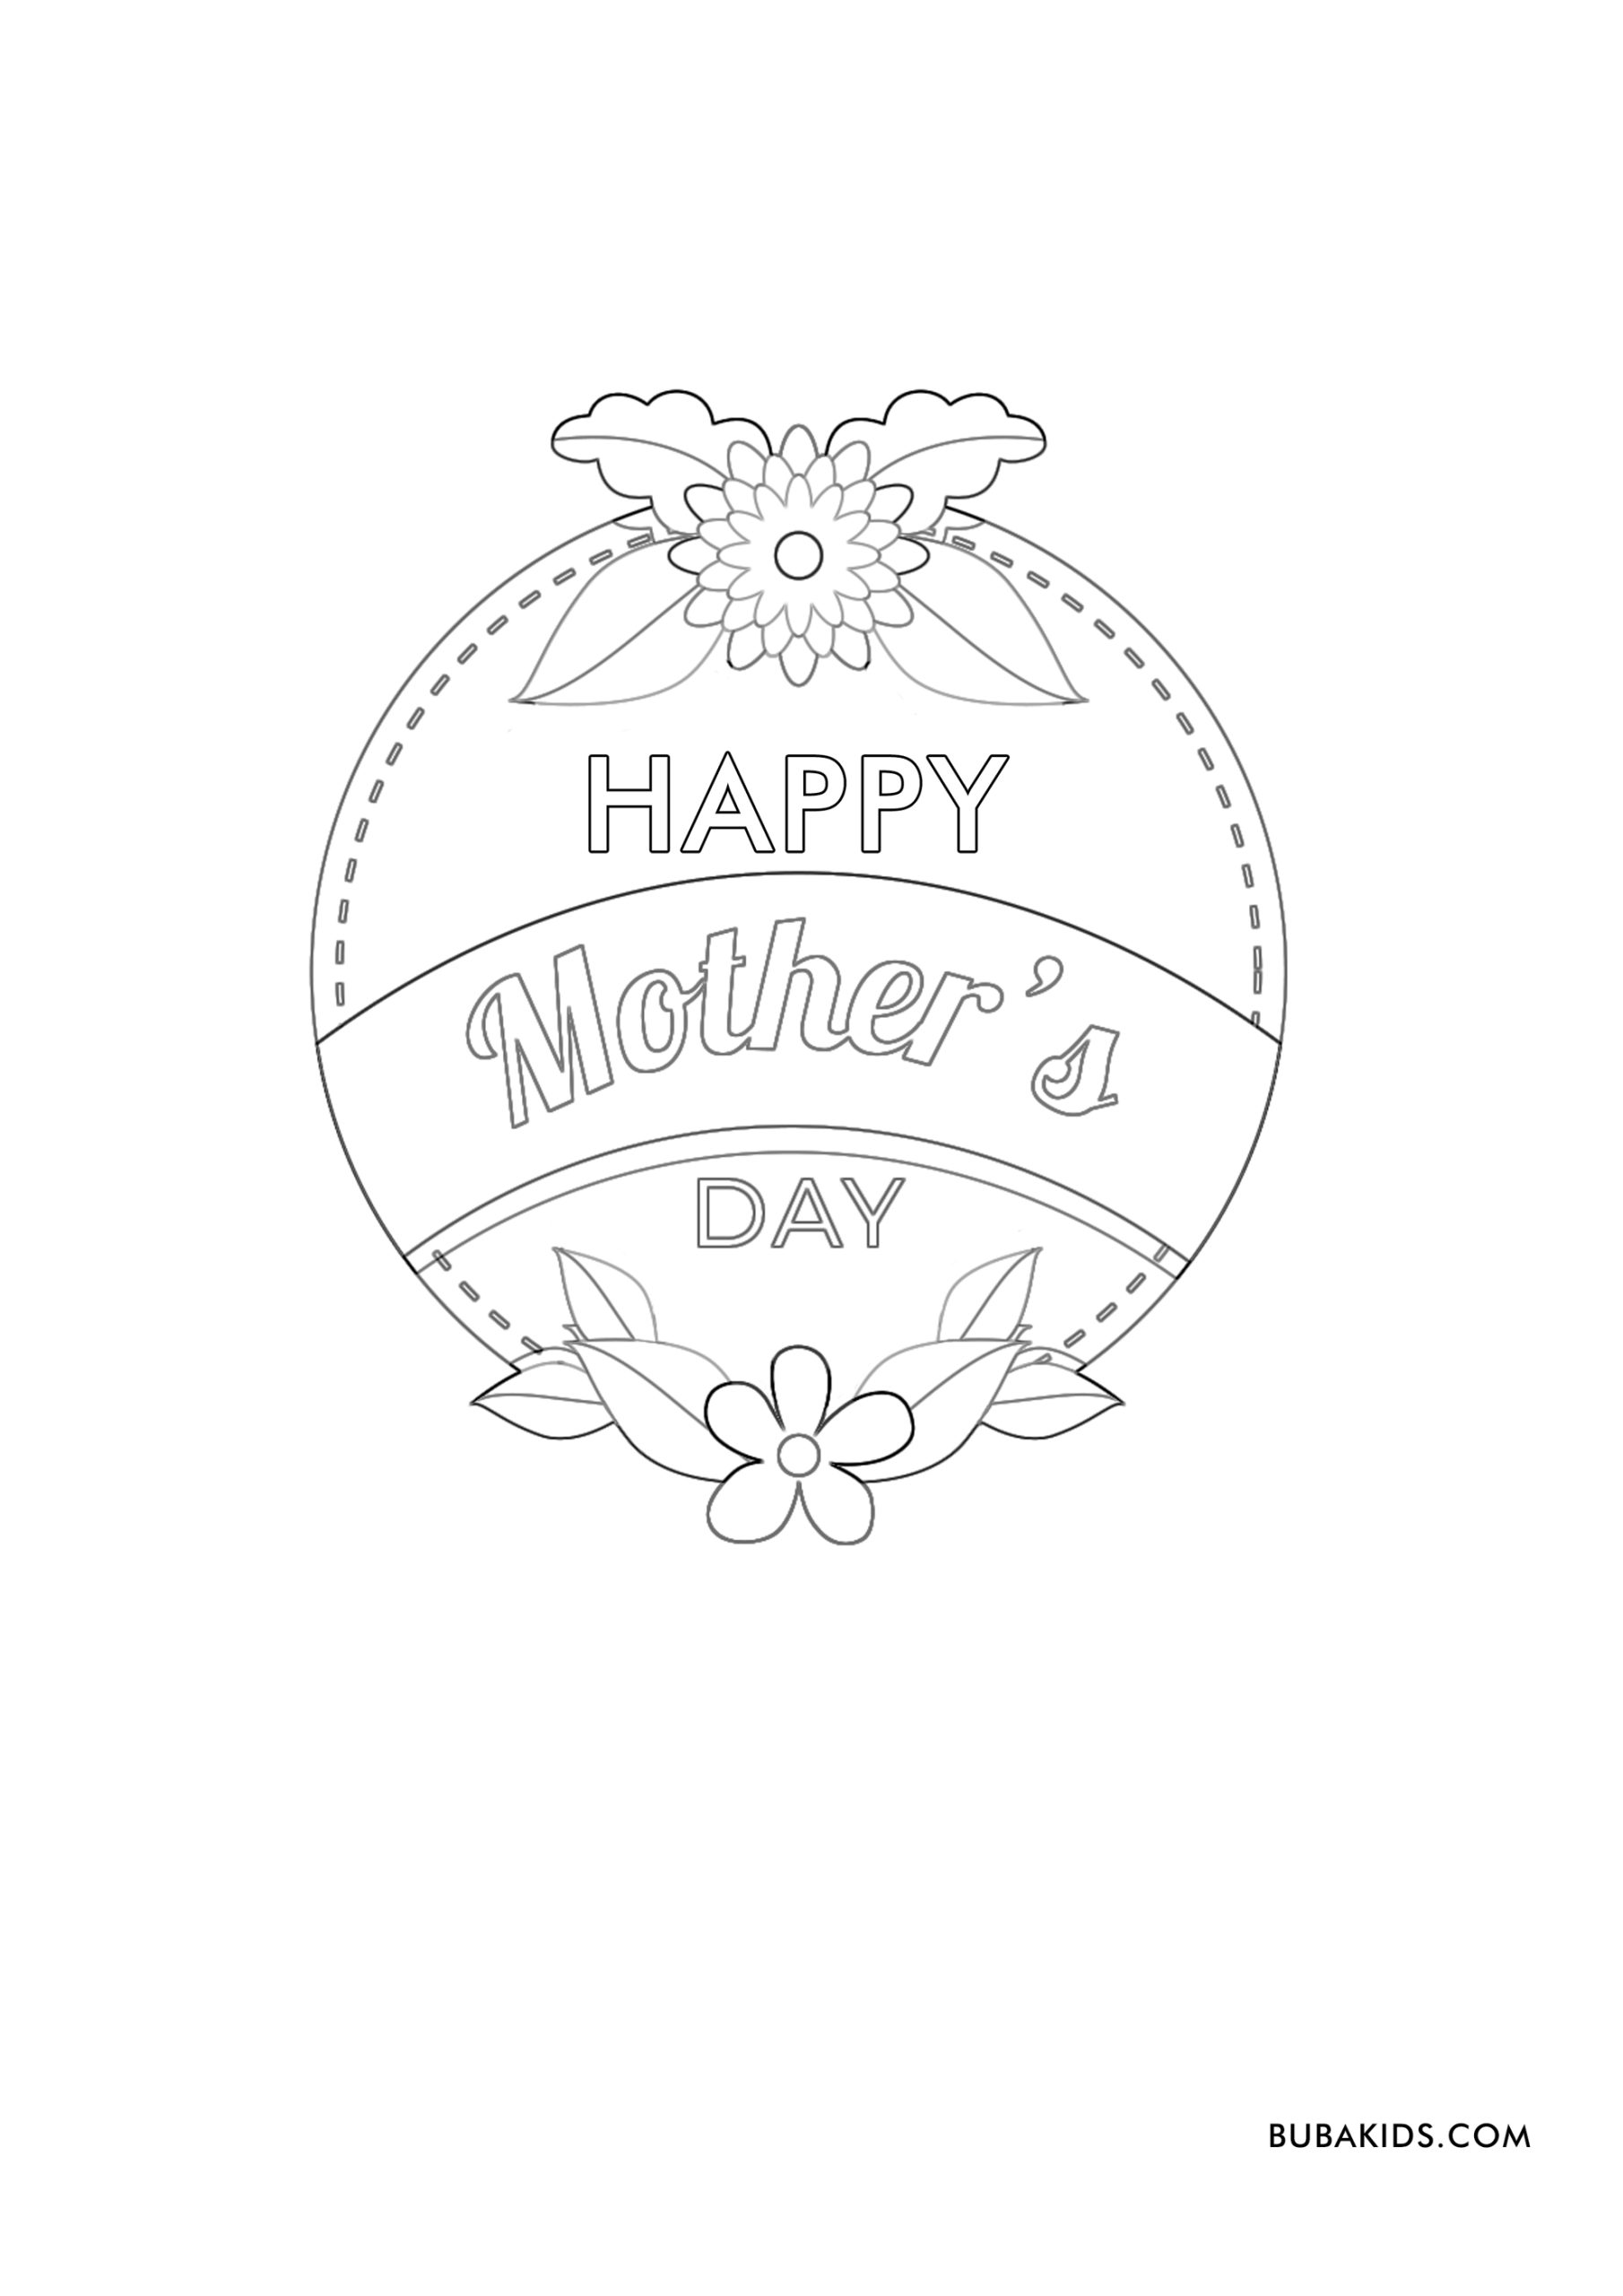 Happy Mother’s Day 2022 Wallpaper